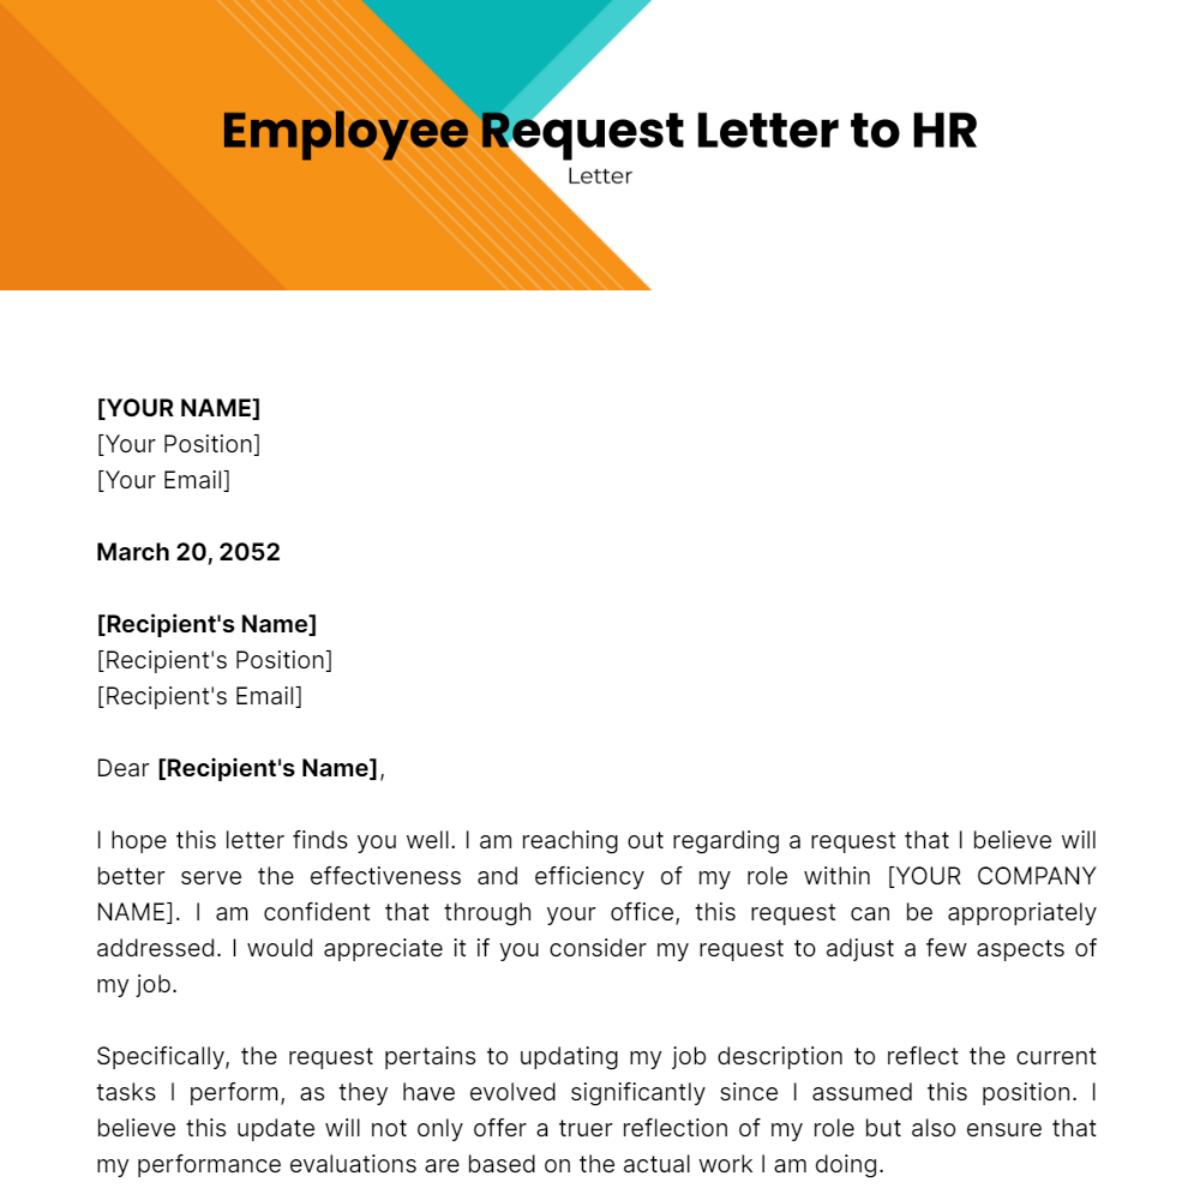 Employee Request Letter to HR Template